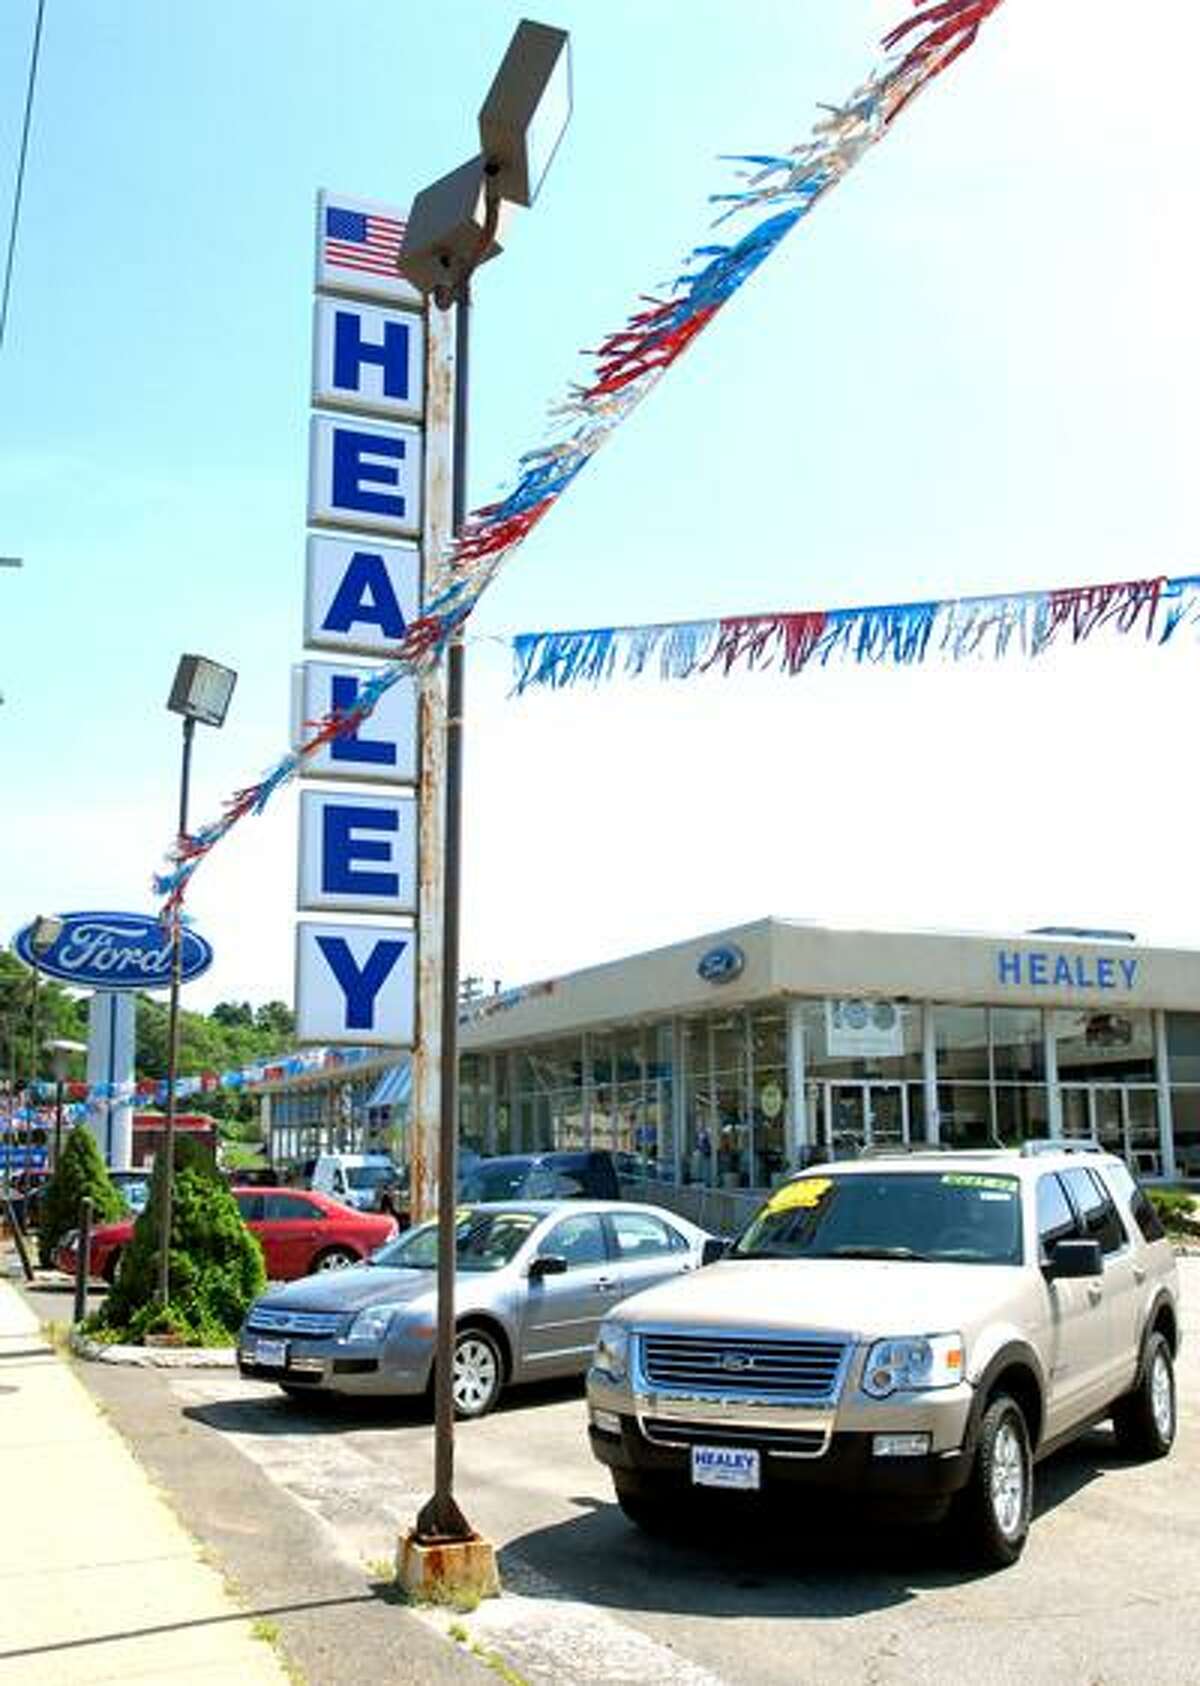 The Healey Ford dealership in Ansonia is photographed on 6/2/2010.Photo by Arnold Gold AG0365E